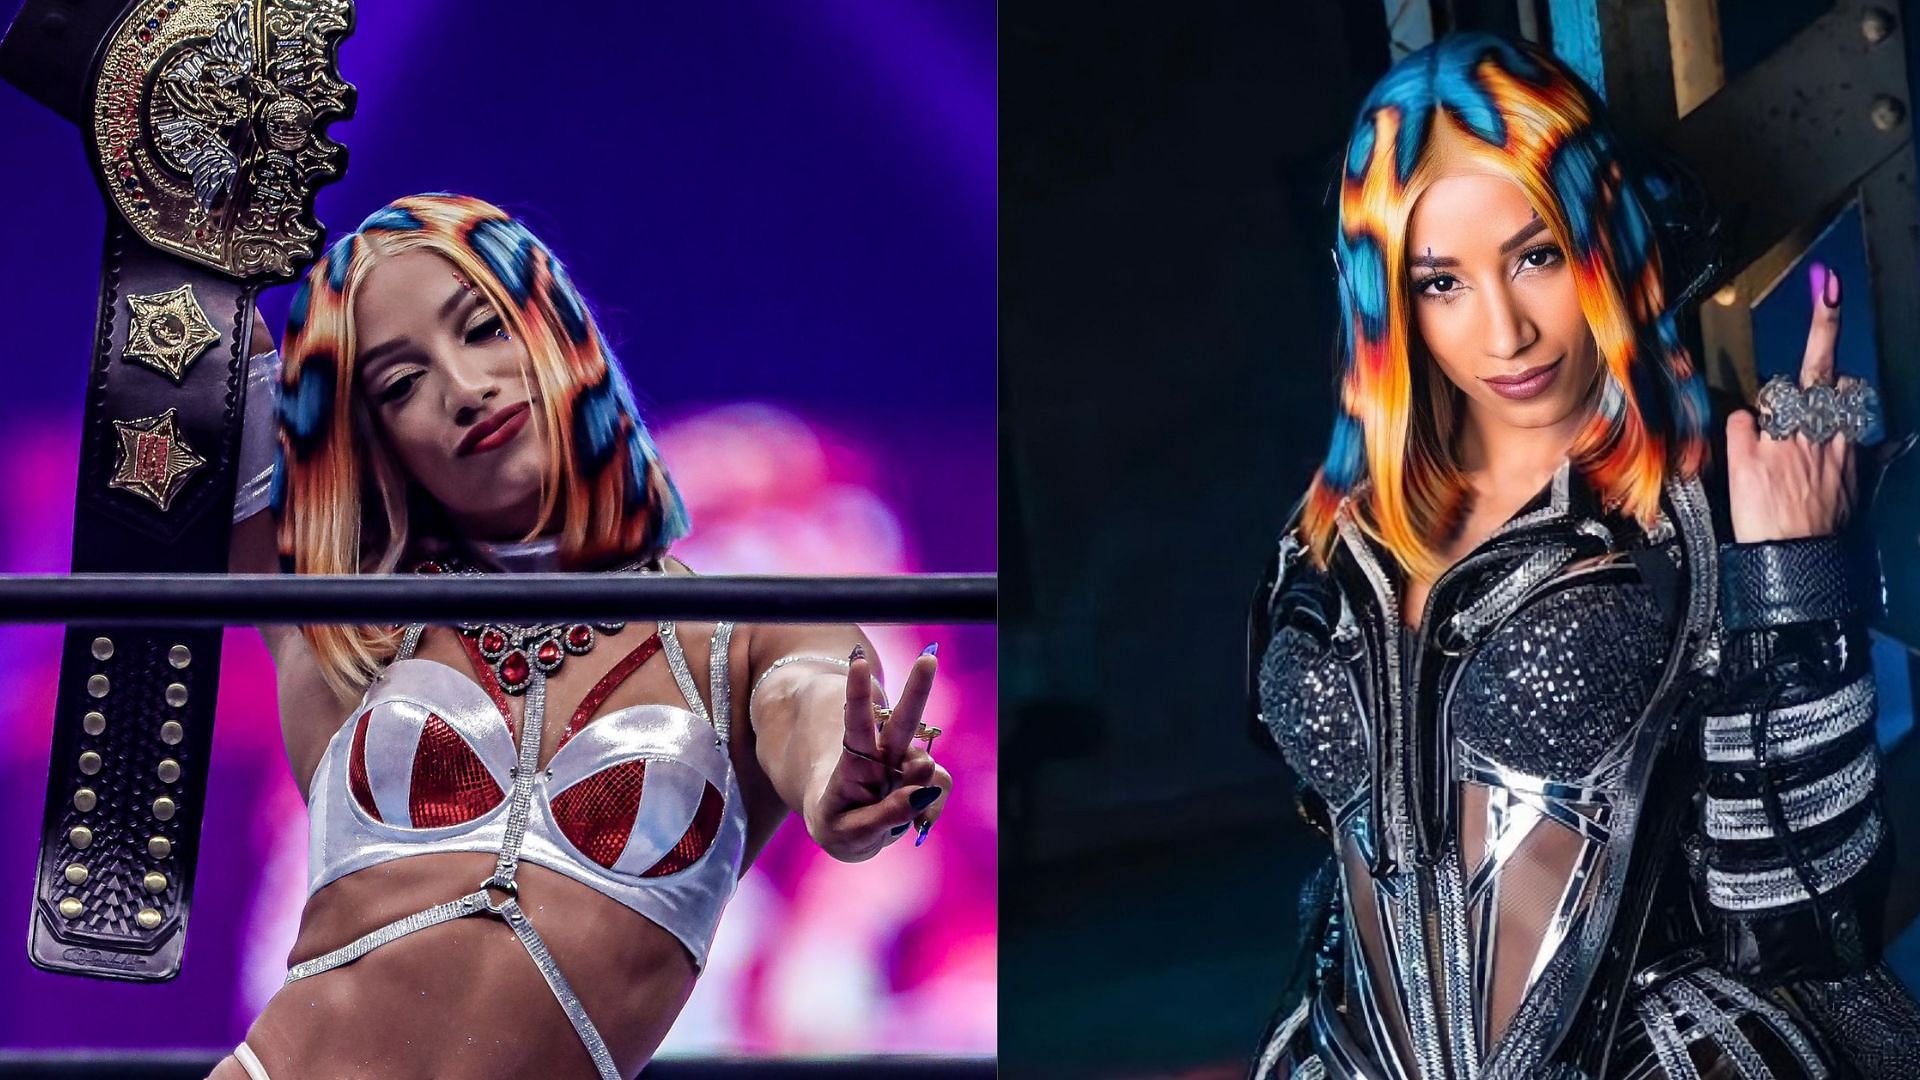 Former WWE star Sasha Banks debuted at a recent New Japan Pro Wrestling event as Mercedes Mone